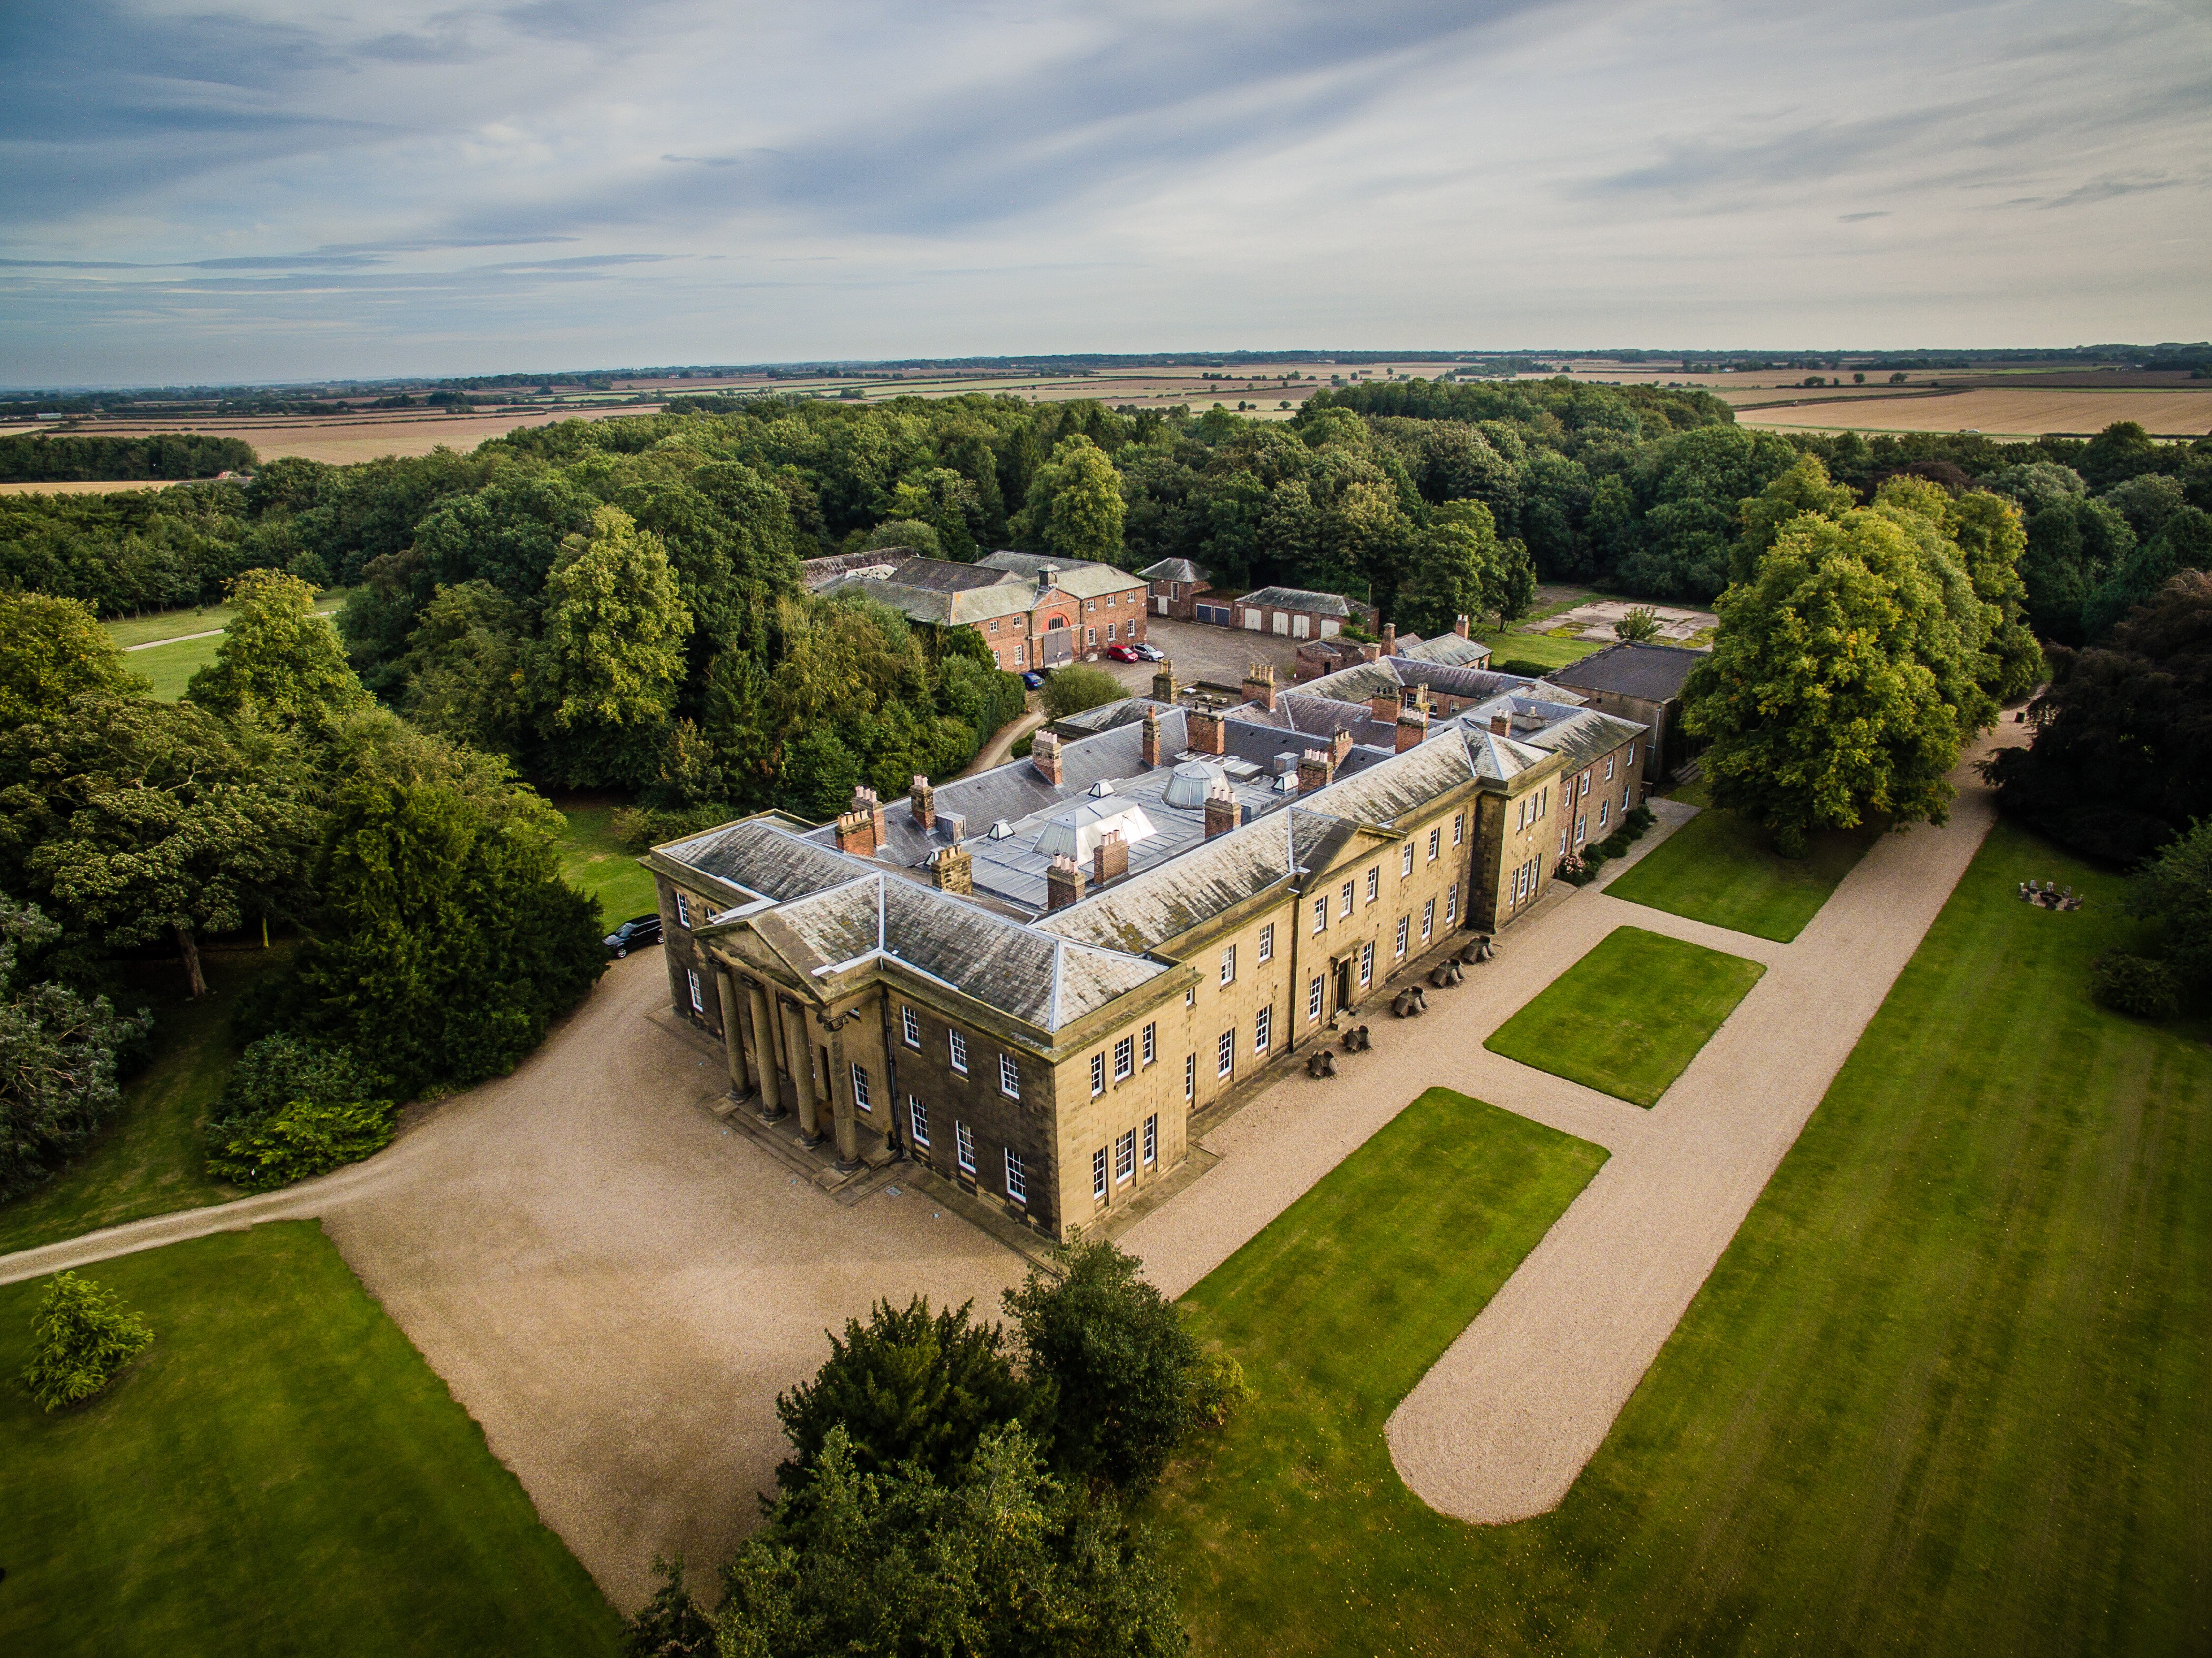 Dine acquires Yorkshire stately home from TV's Sarah Beeny to convert into wedding venue